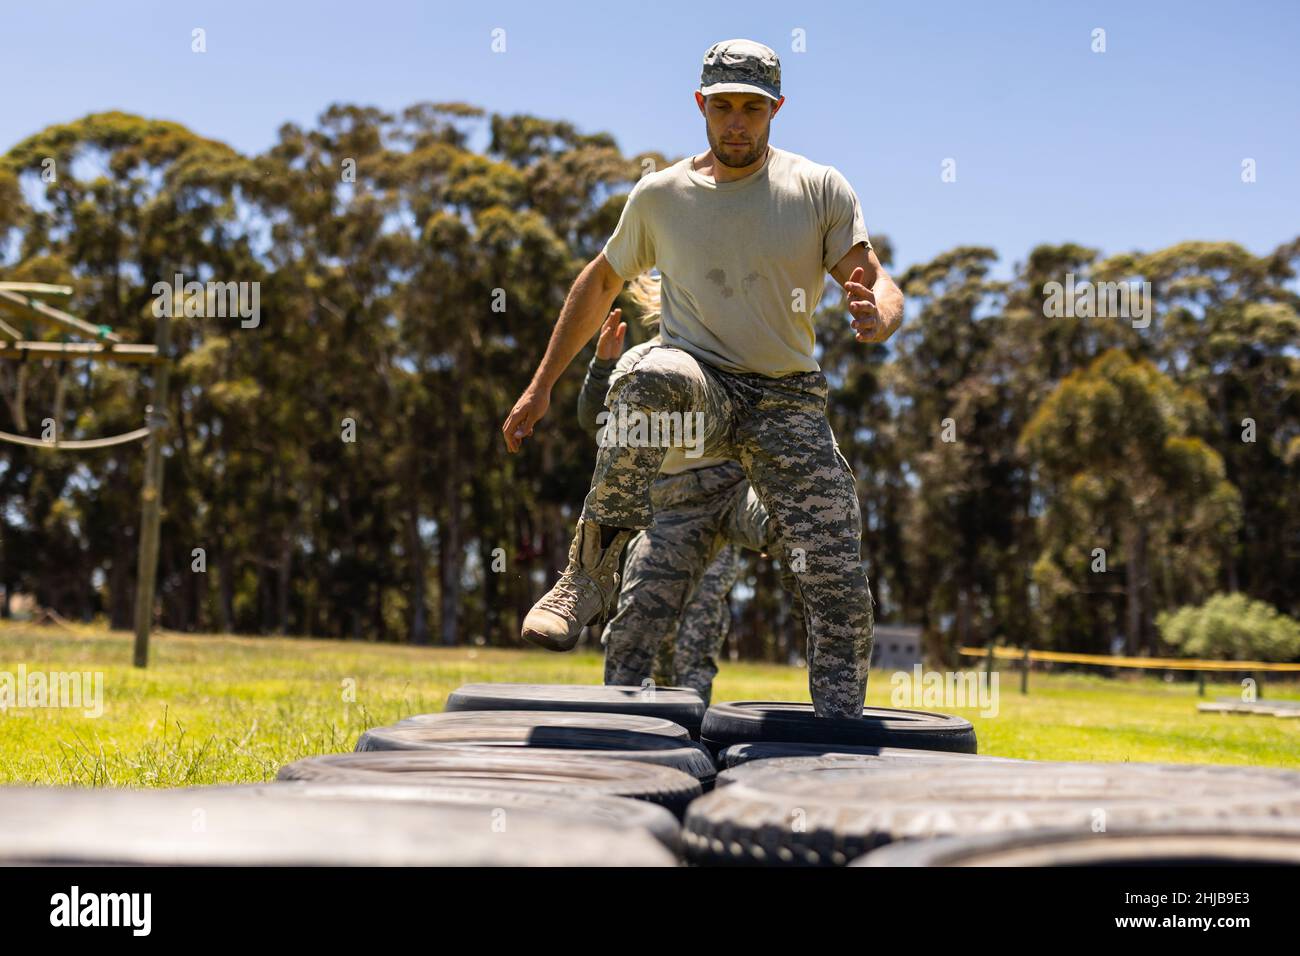 Caucasian male soldier walking on tires during obstacle course at boot camp Stock Photo